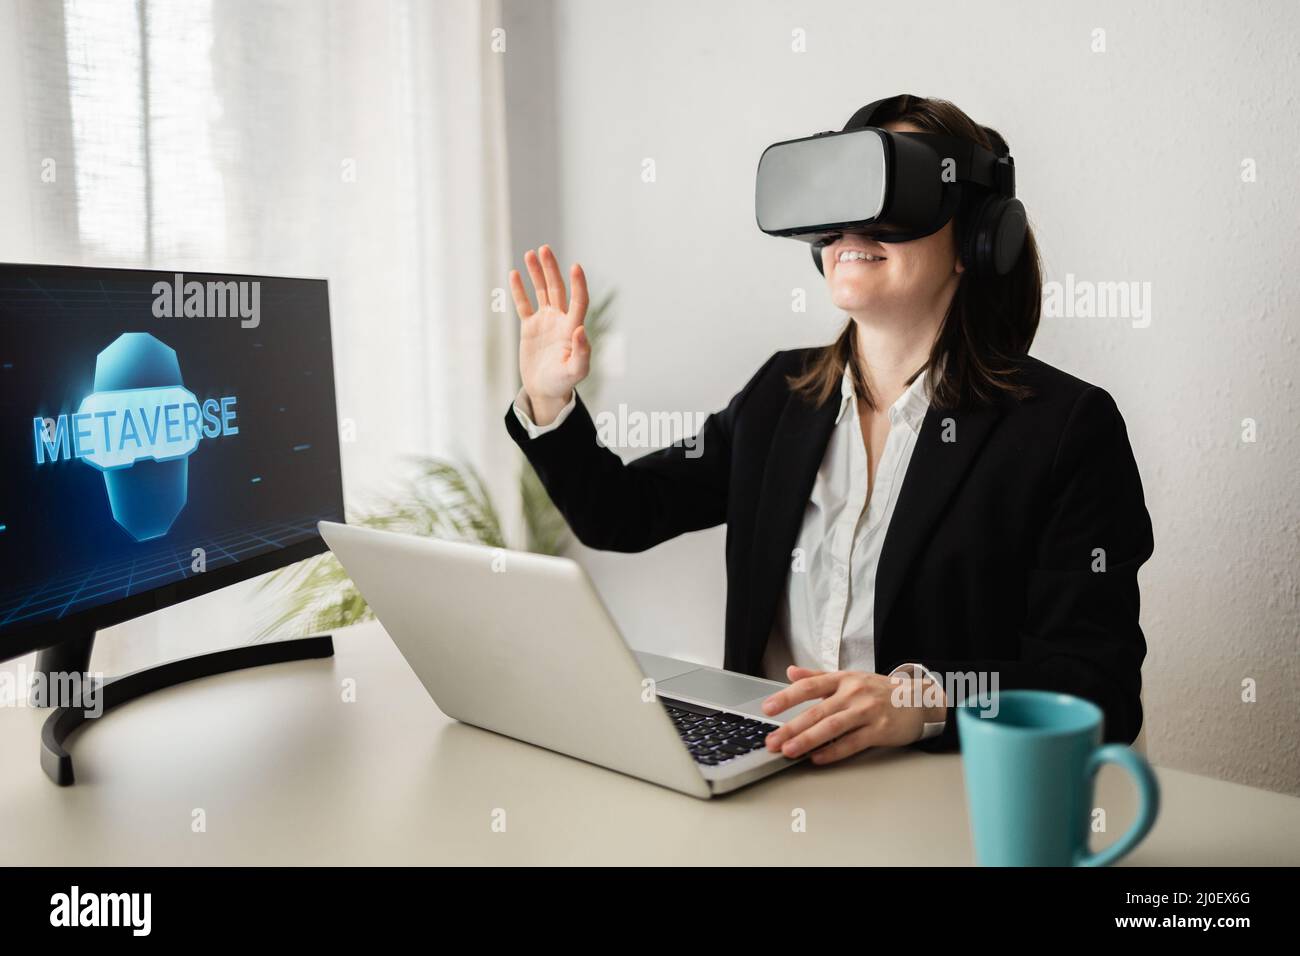 Metaverse technology concept - Business woman doing video call wearing virtual reality headset - Focus on goggles Stock Photo